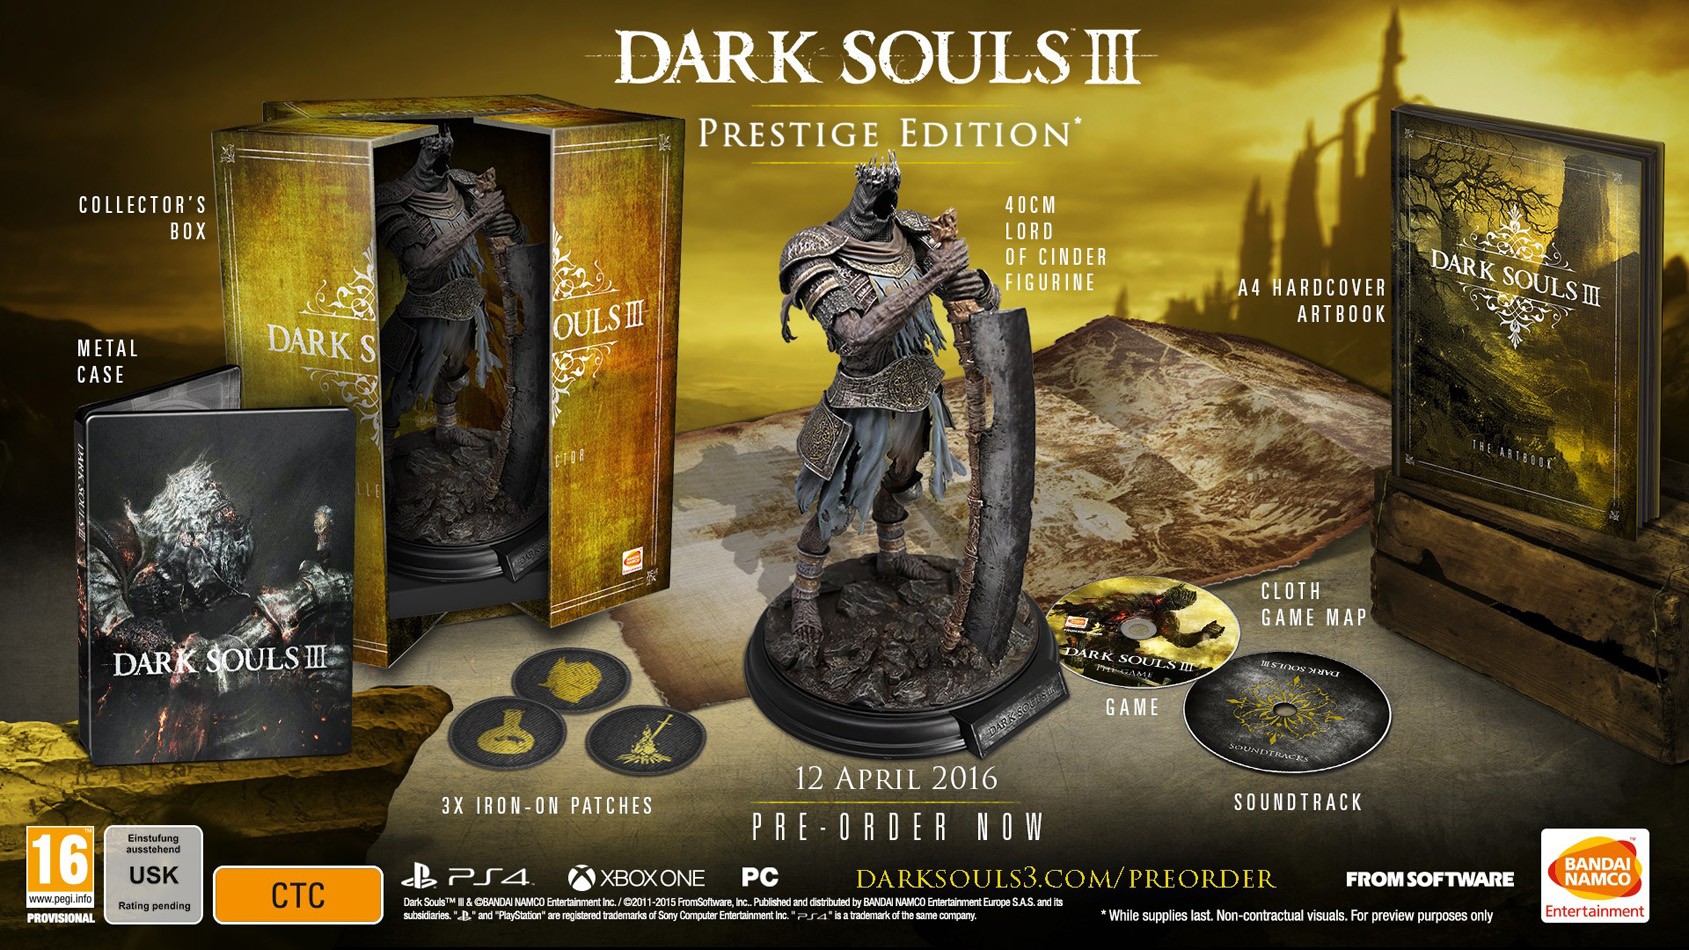 dark-souls-3-leak-shows-prestige-and-collector-s-editions-figurines-and-special-cases-are-offered-495925-2.jpg